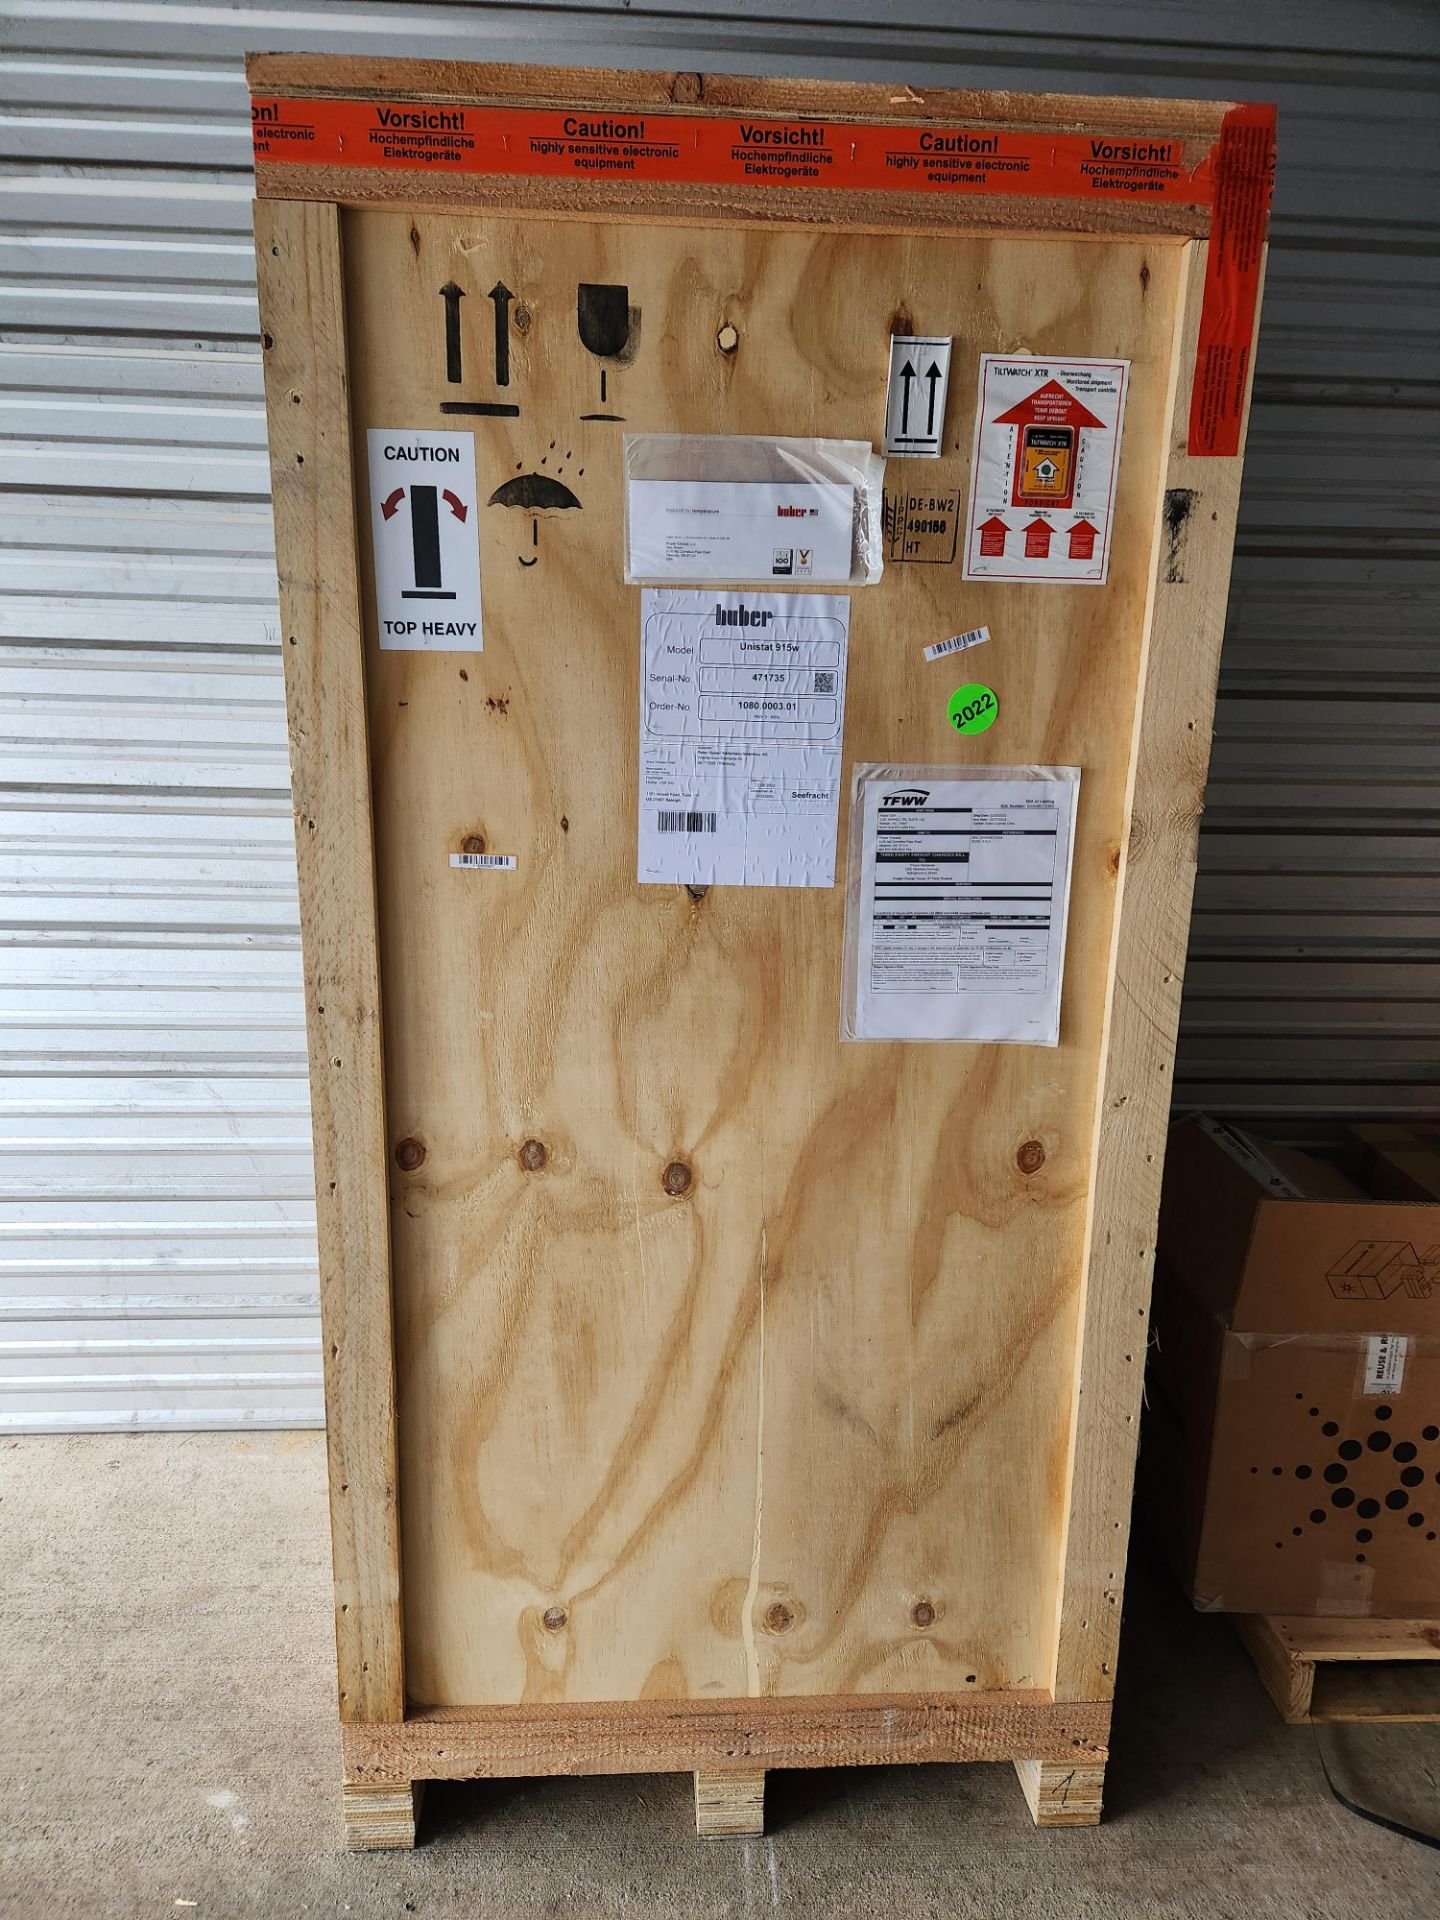 (Located in Portland, OR) Unistat Chiller, Model# 915W, Serial# 471735